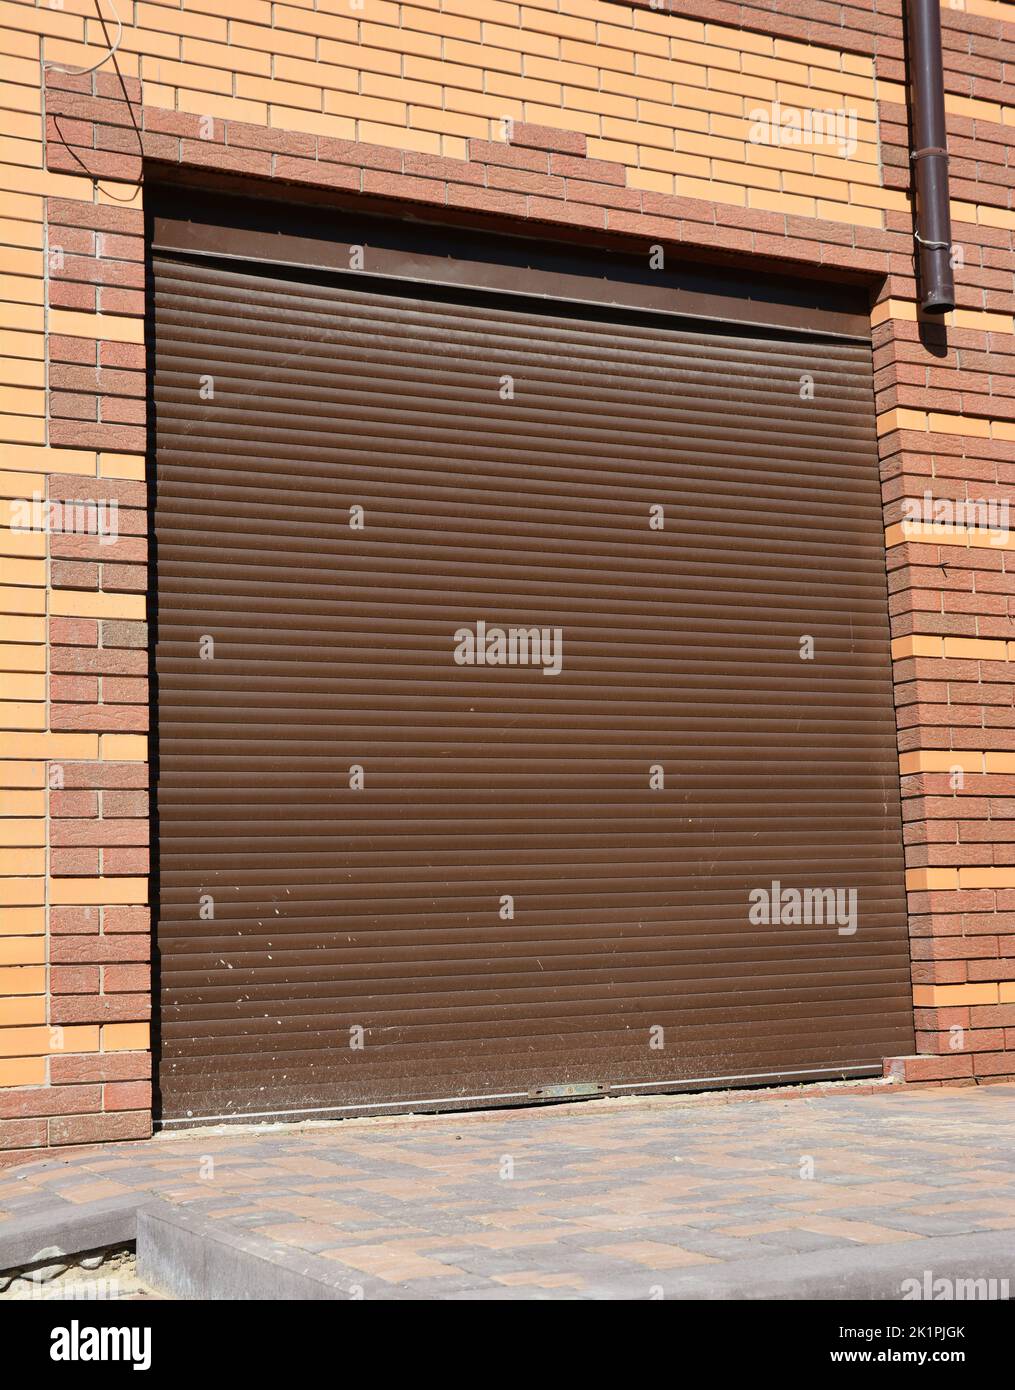 Metal roller shutter installation for house entance protection Stock Photo